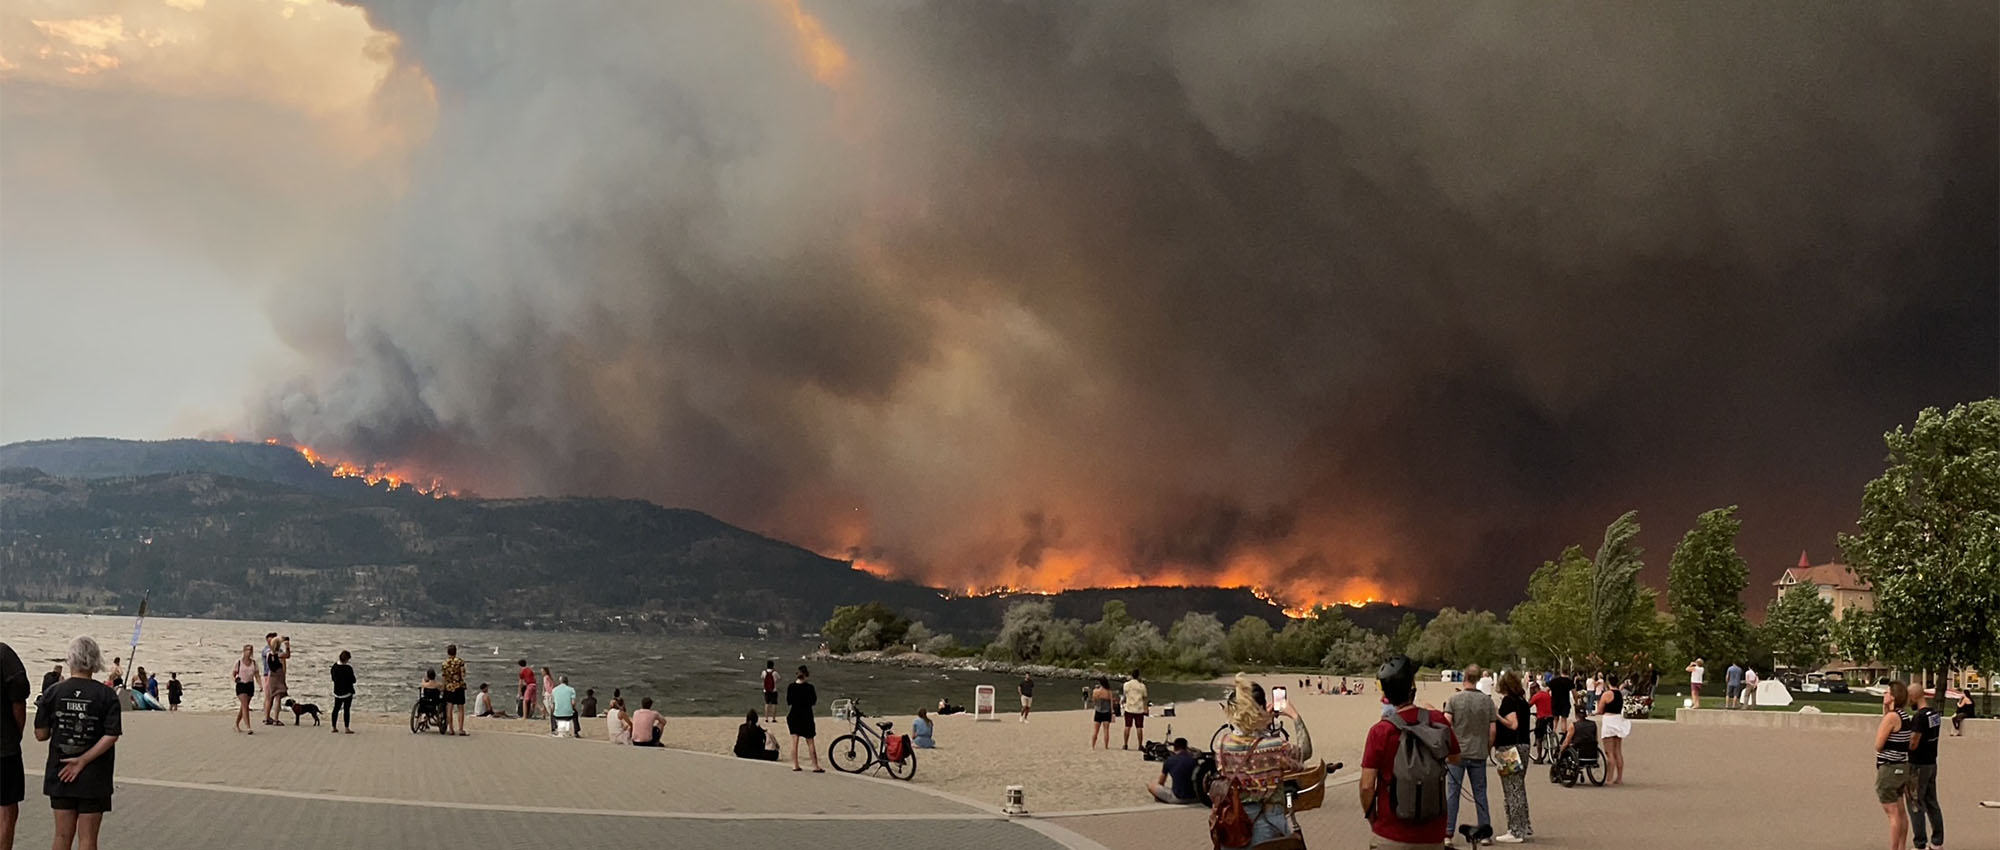 Wildfire in the mountains of West Kelowna